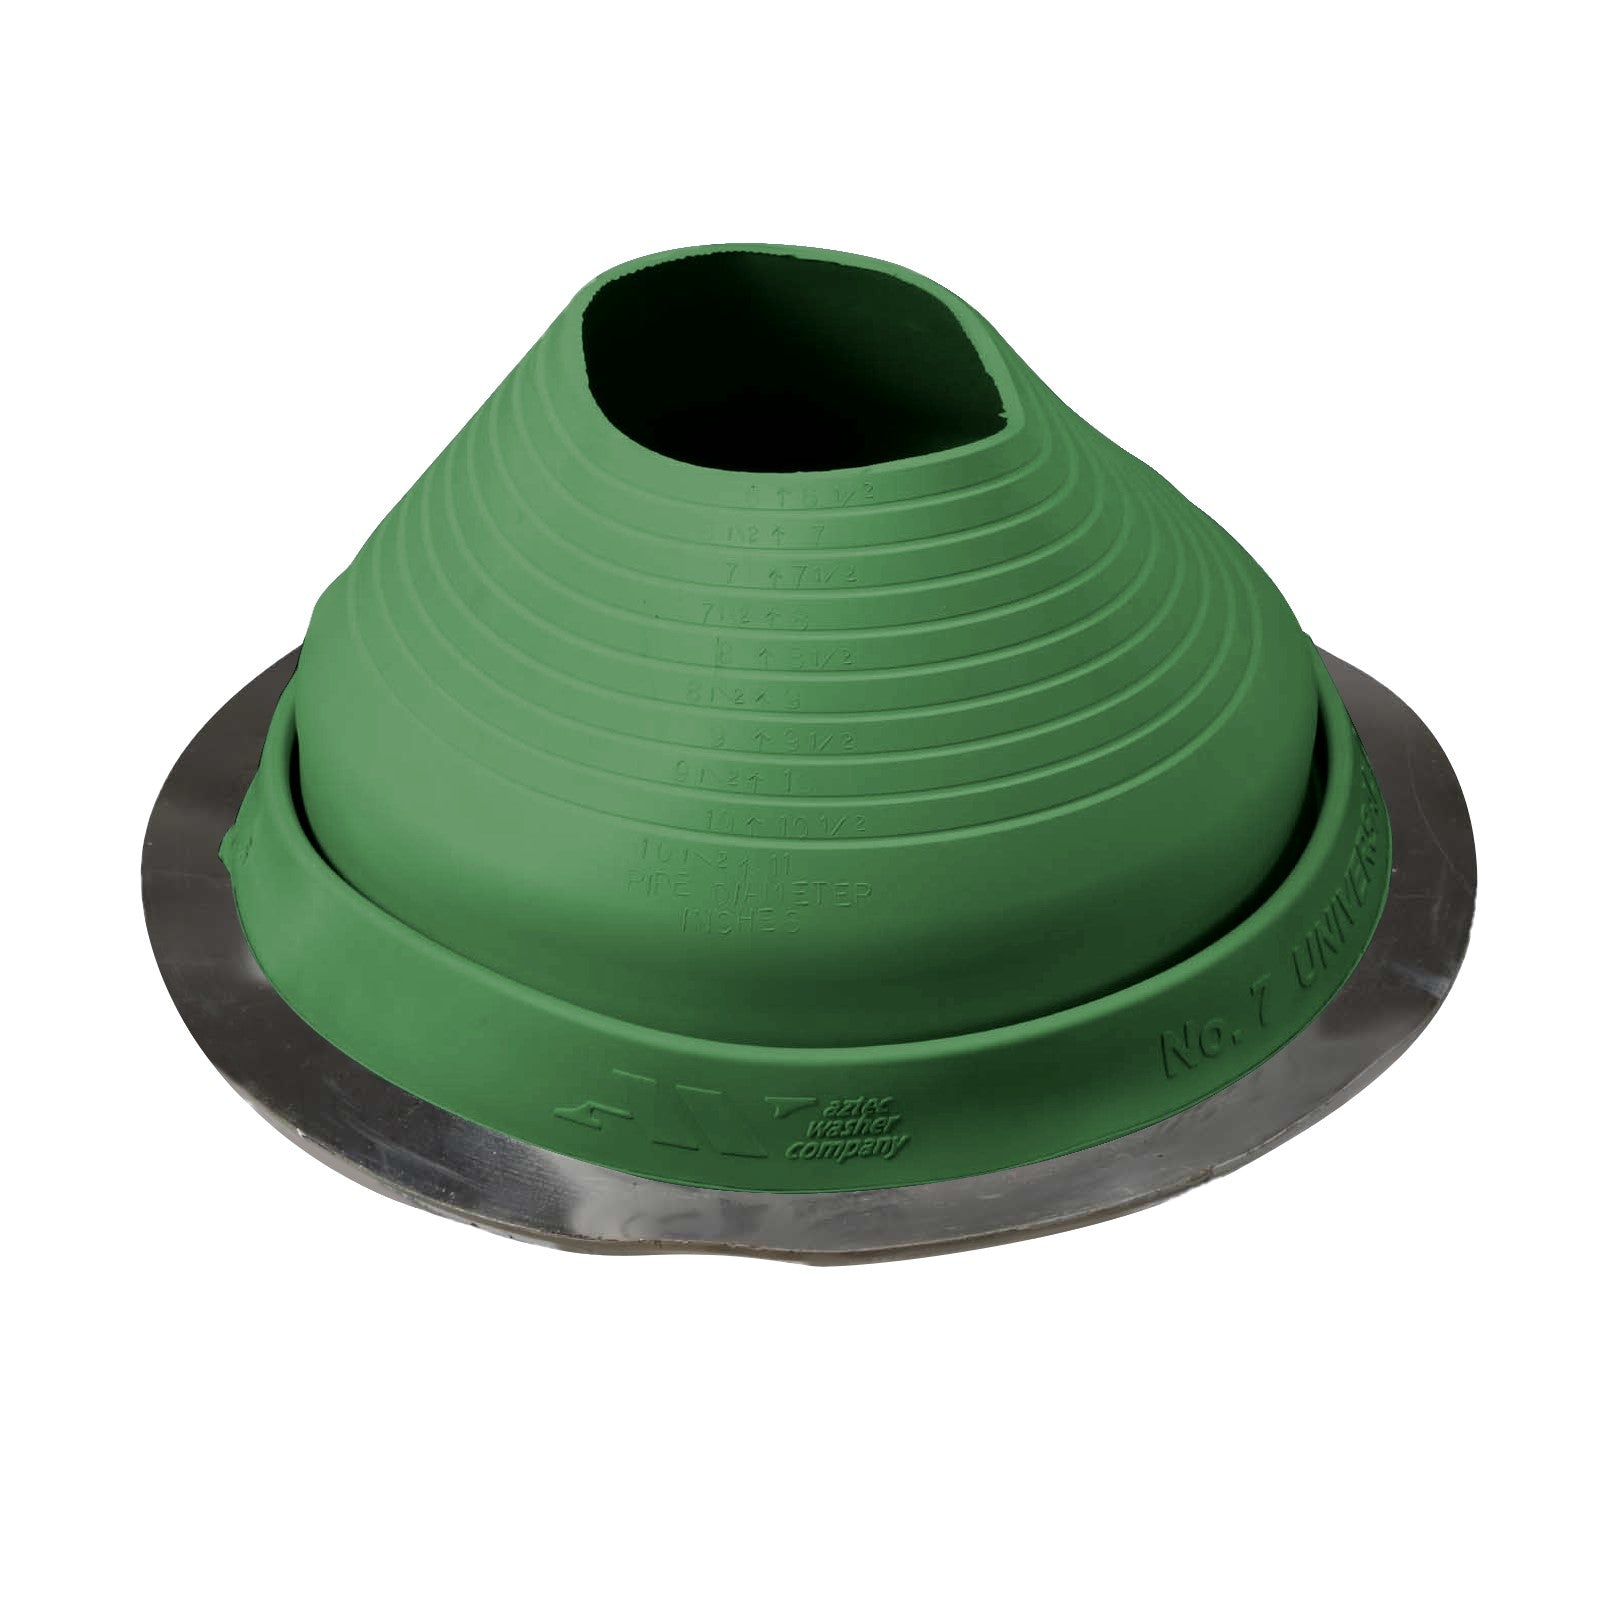 #7 Roofjack Round EPDM Pipe Flashing Boot Light Green